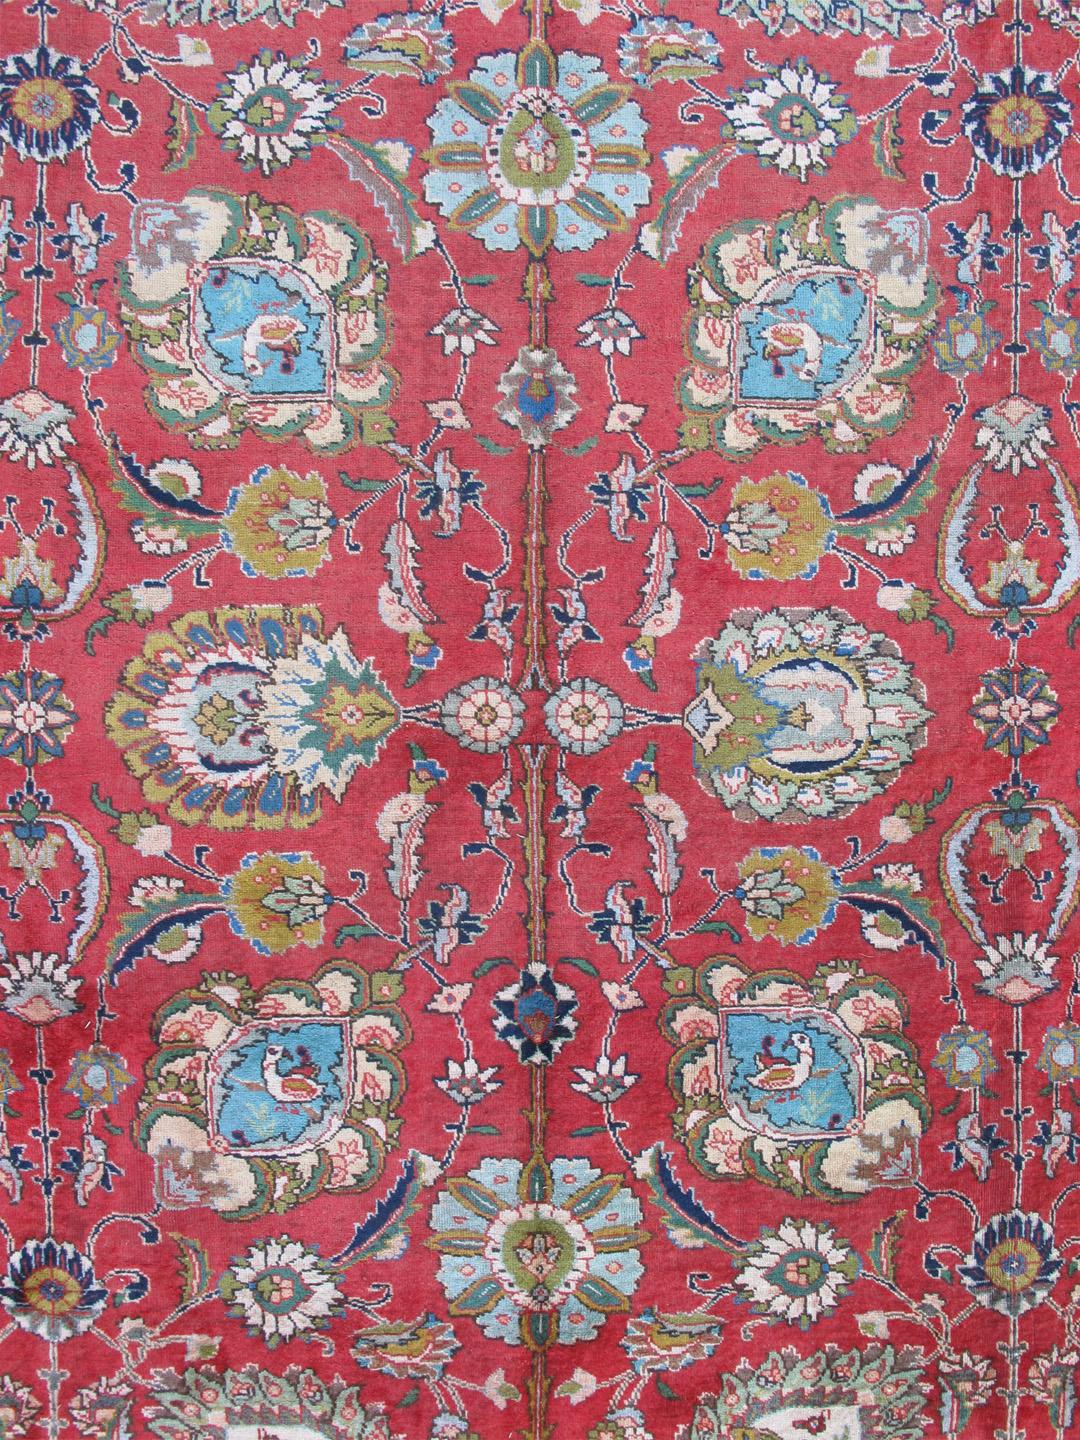 Soft red background, ivory and blue, Tabriz rug from Persia with Repeating Geometric design, rug H-411-63, country of origin / type: Iran / Tabriz, circa 1950

This vintage Persian Tabriz carpet (circa mid20th century) features a refined palate of